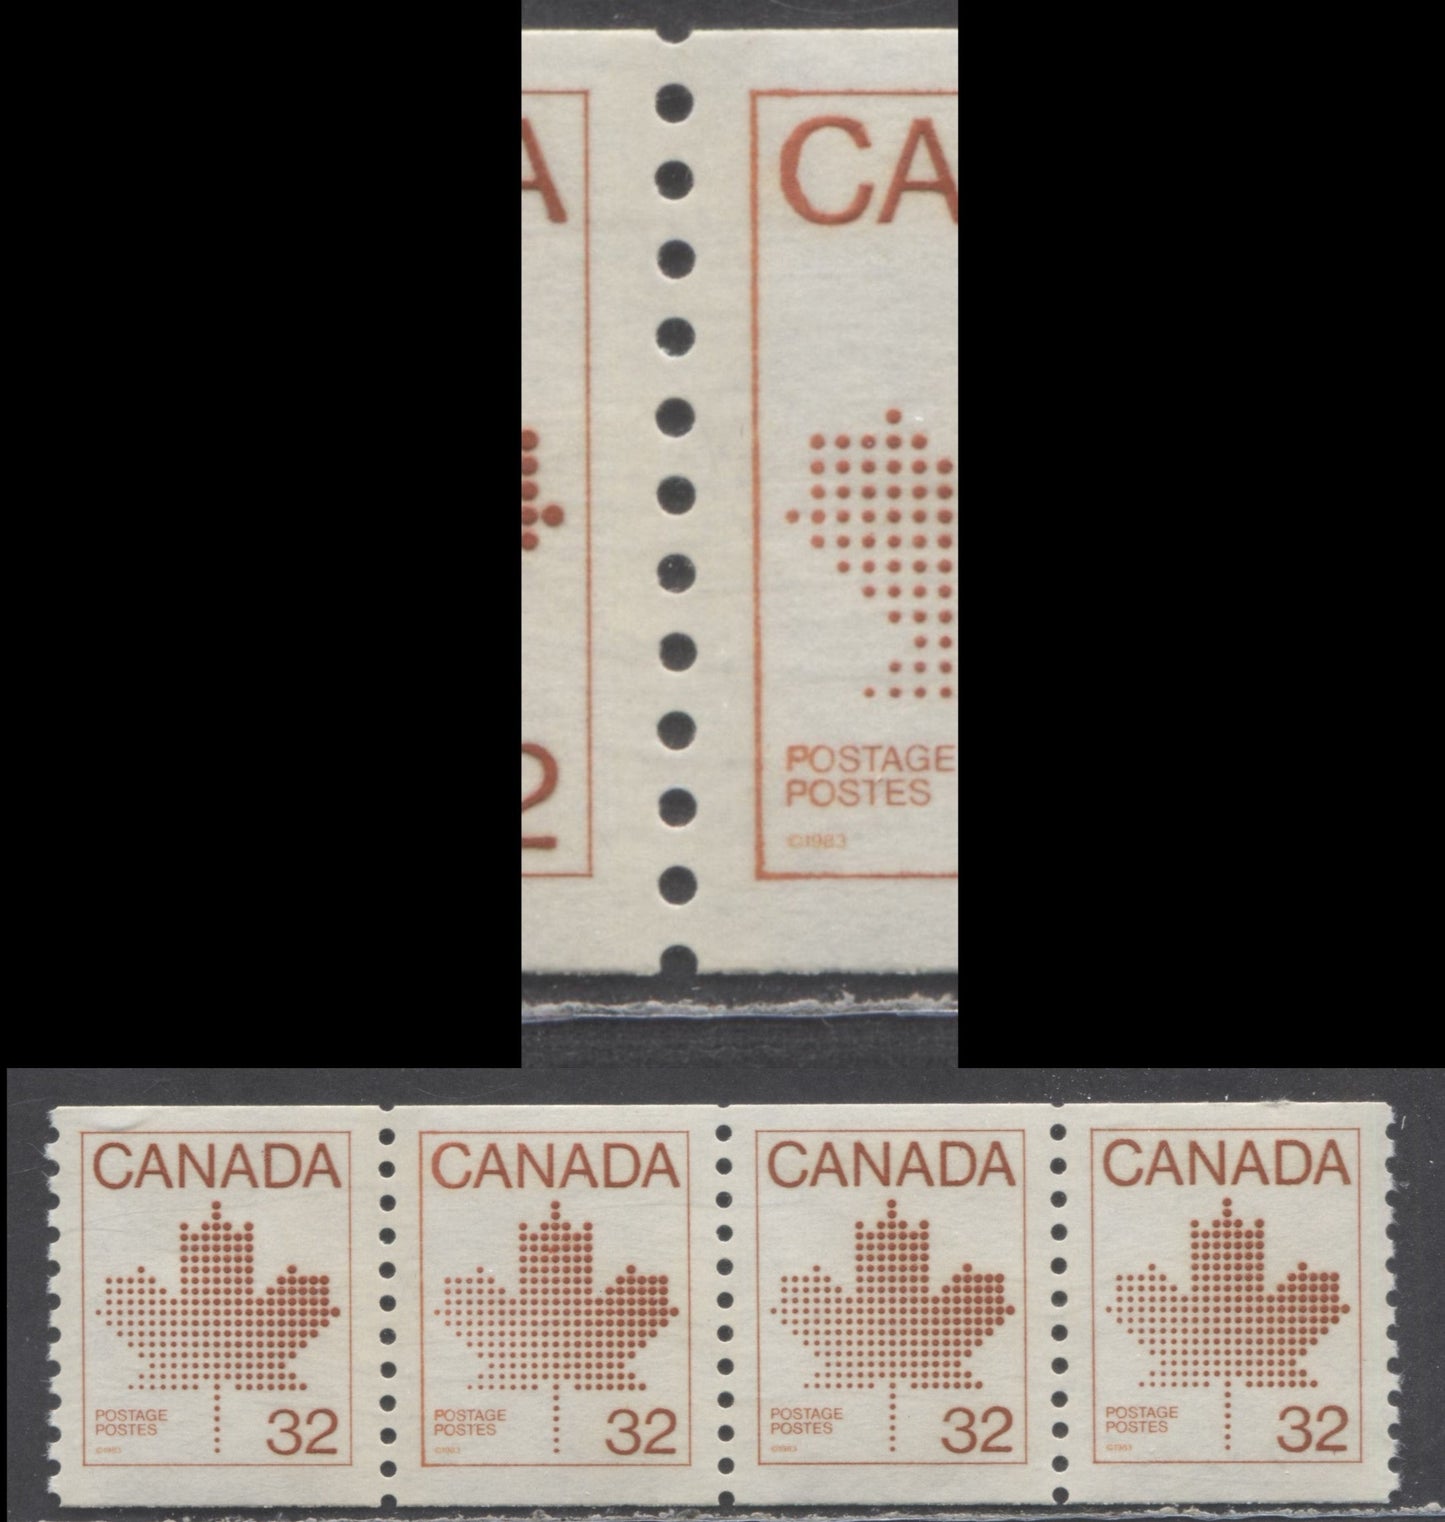 Lot 321 Canada #951 32c Brown Maple Leaf, 1982-1983 Artifact Issue, A VFNH Coil Strip Of 4 On DF/DF Abitibi Paper With Blurry Frame